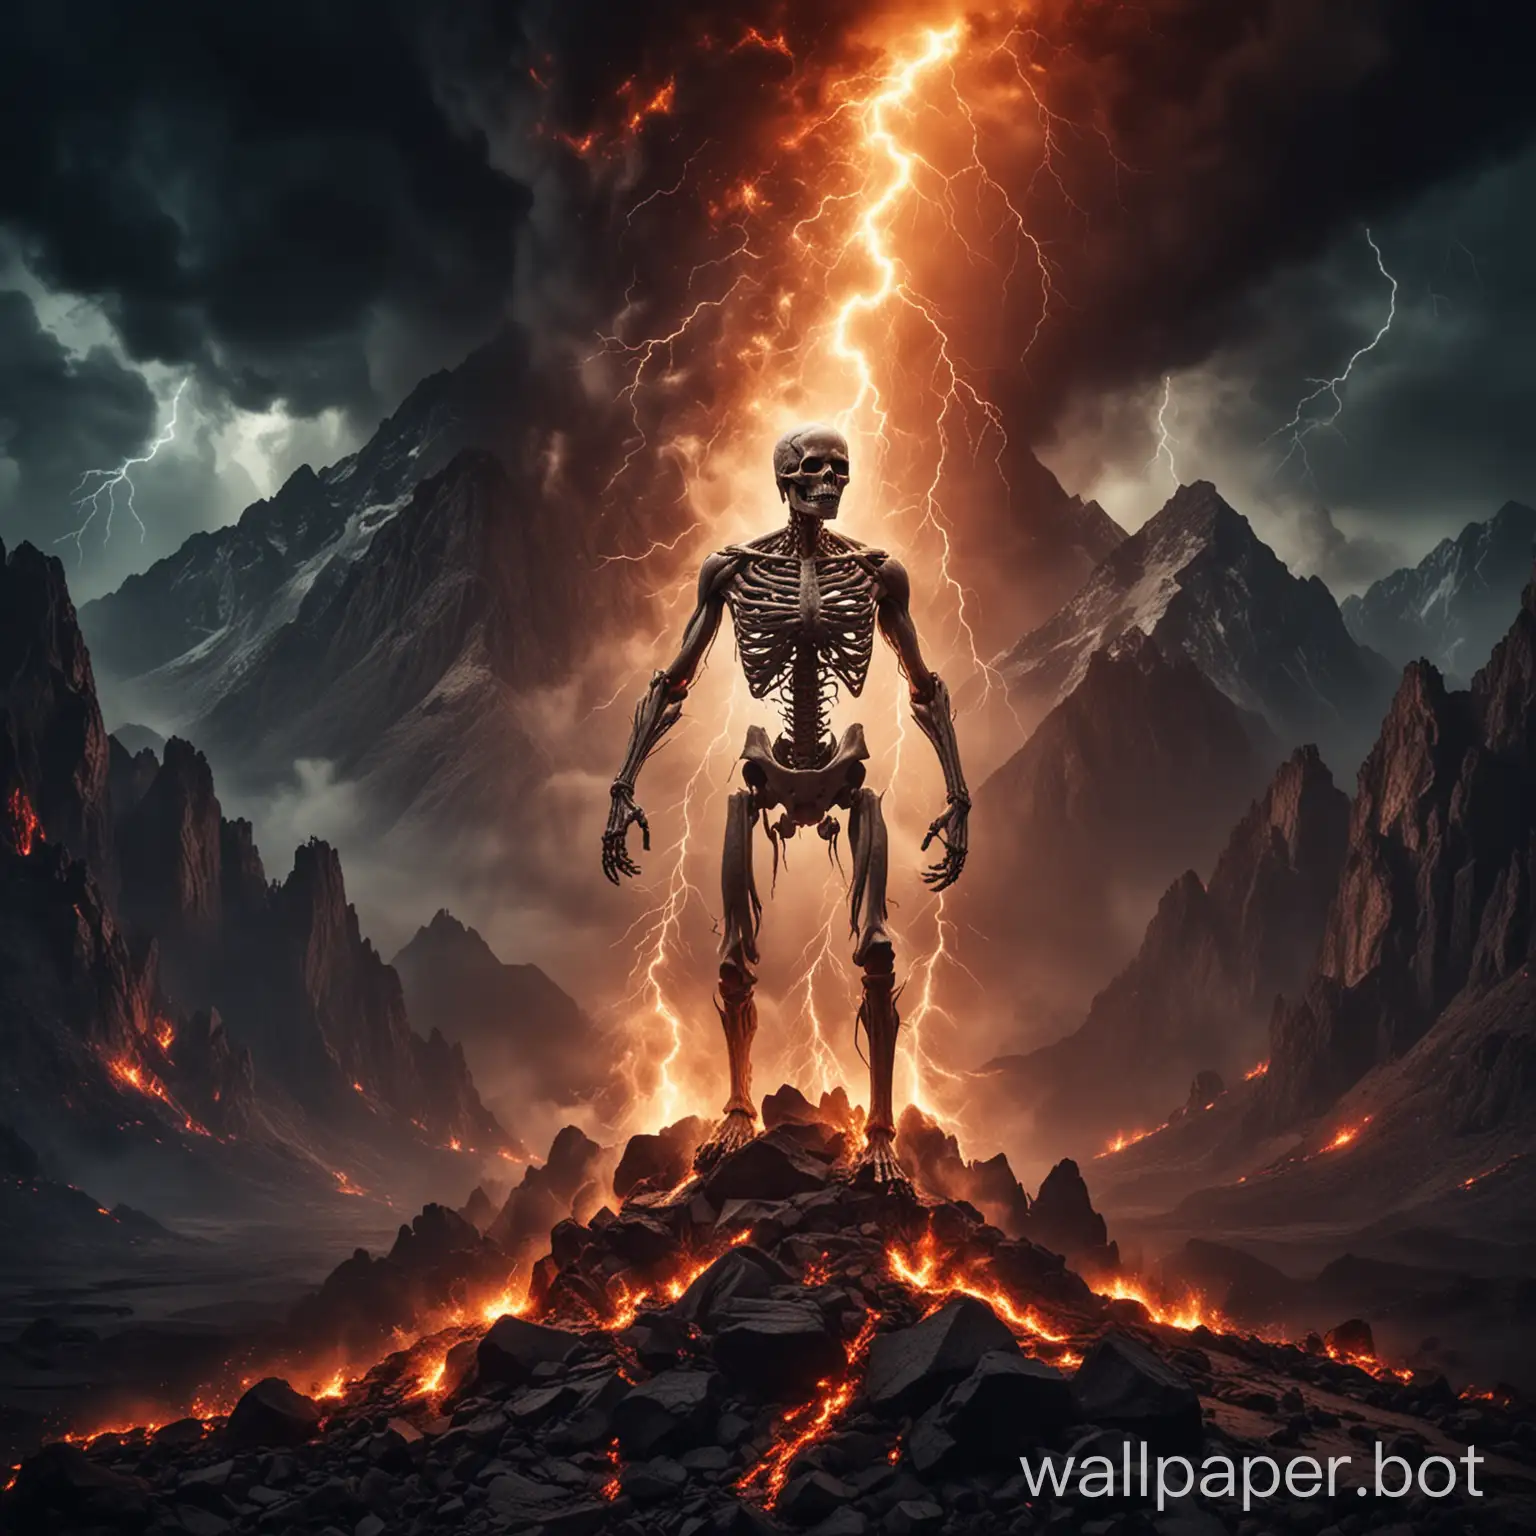 Skeletal man with lightning in the middle of dark and scary mountains in the middle of erupting fire